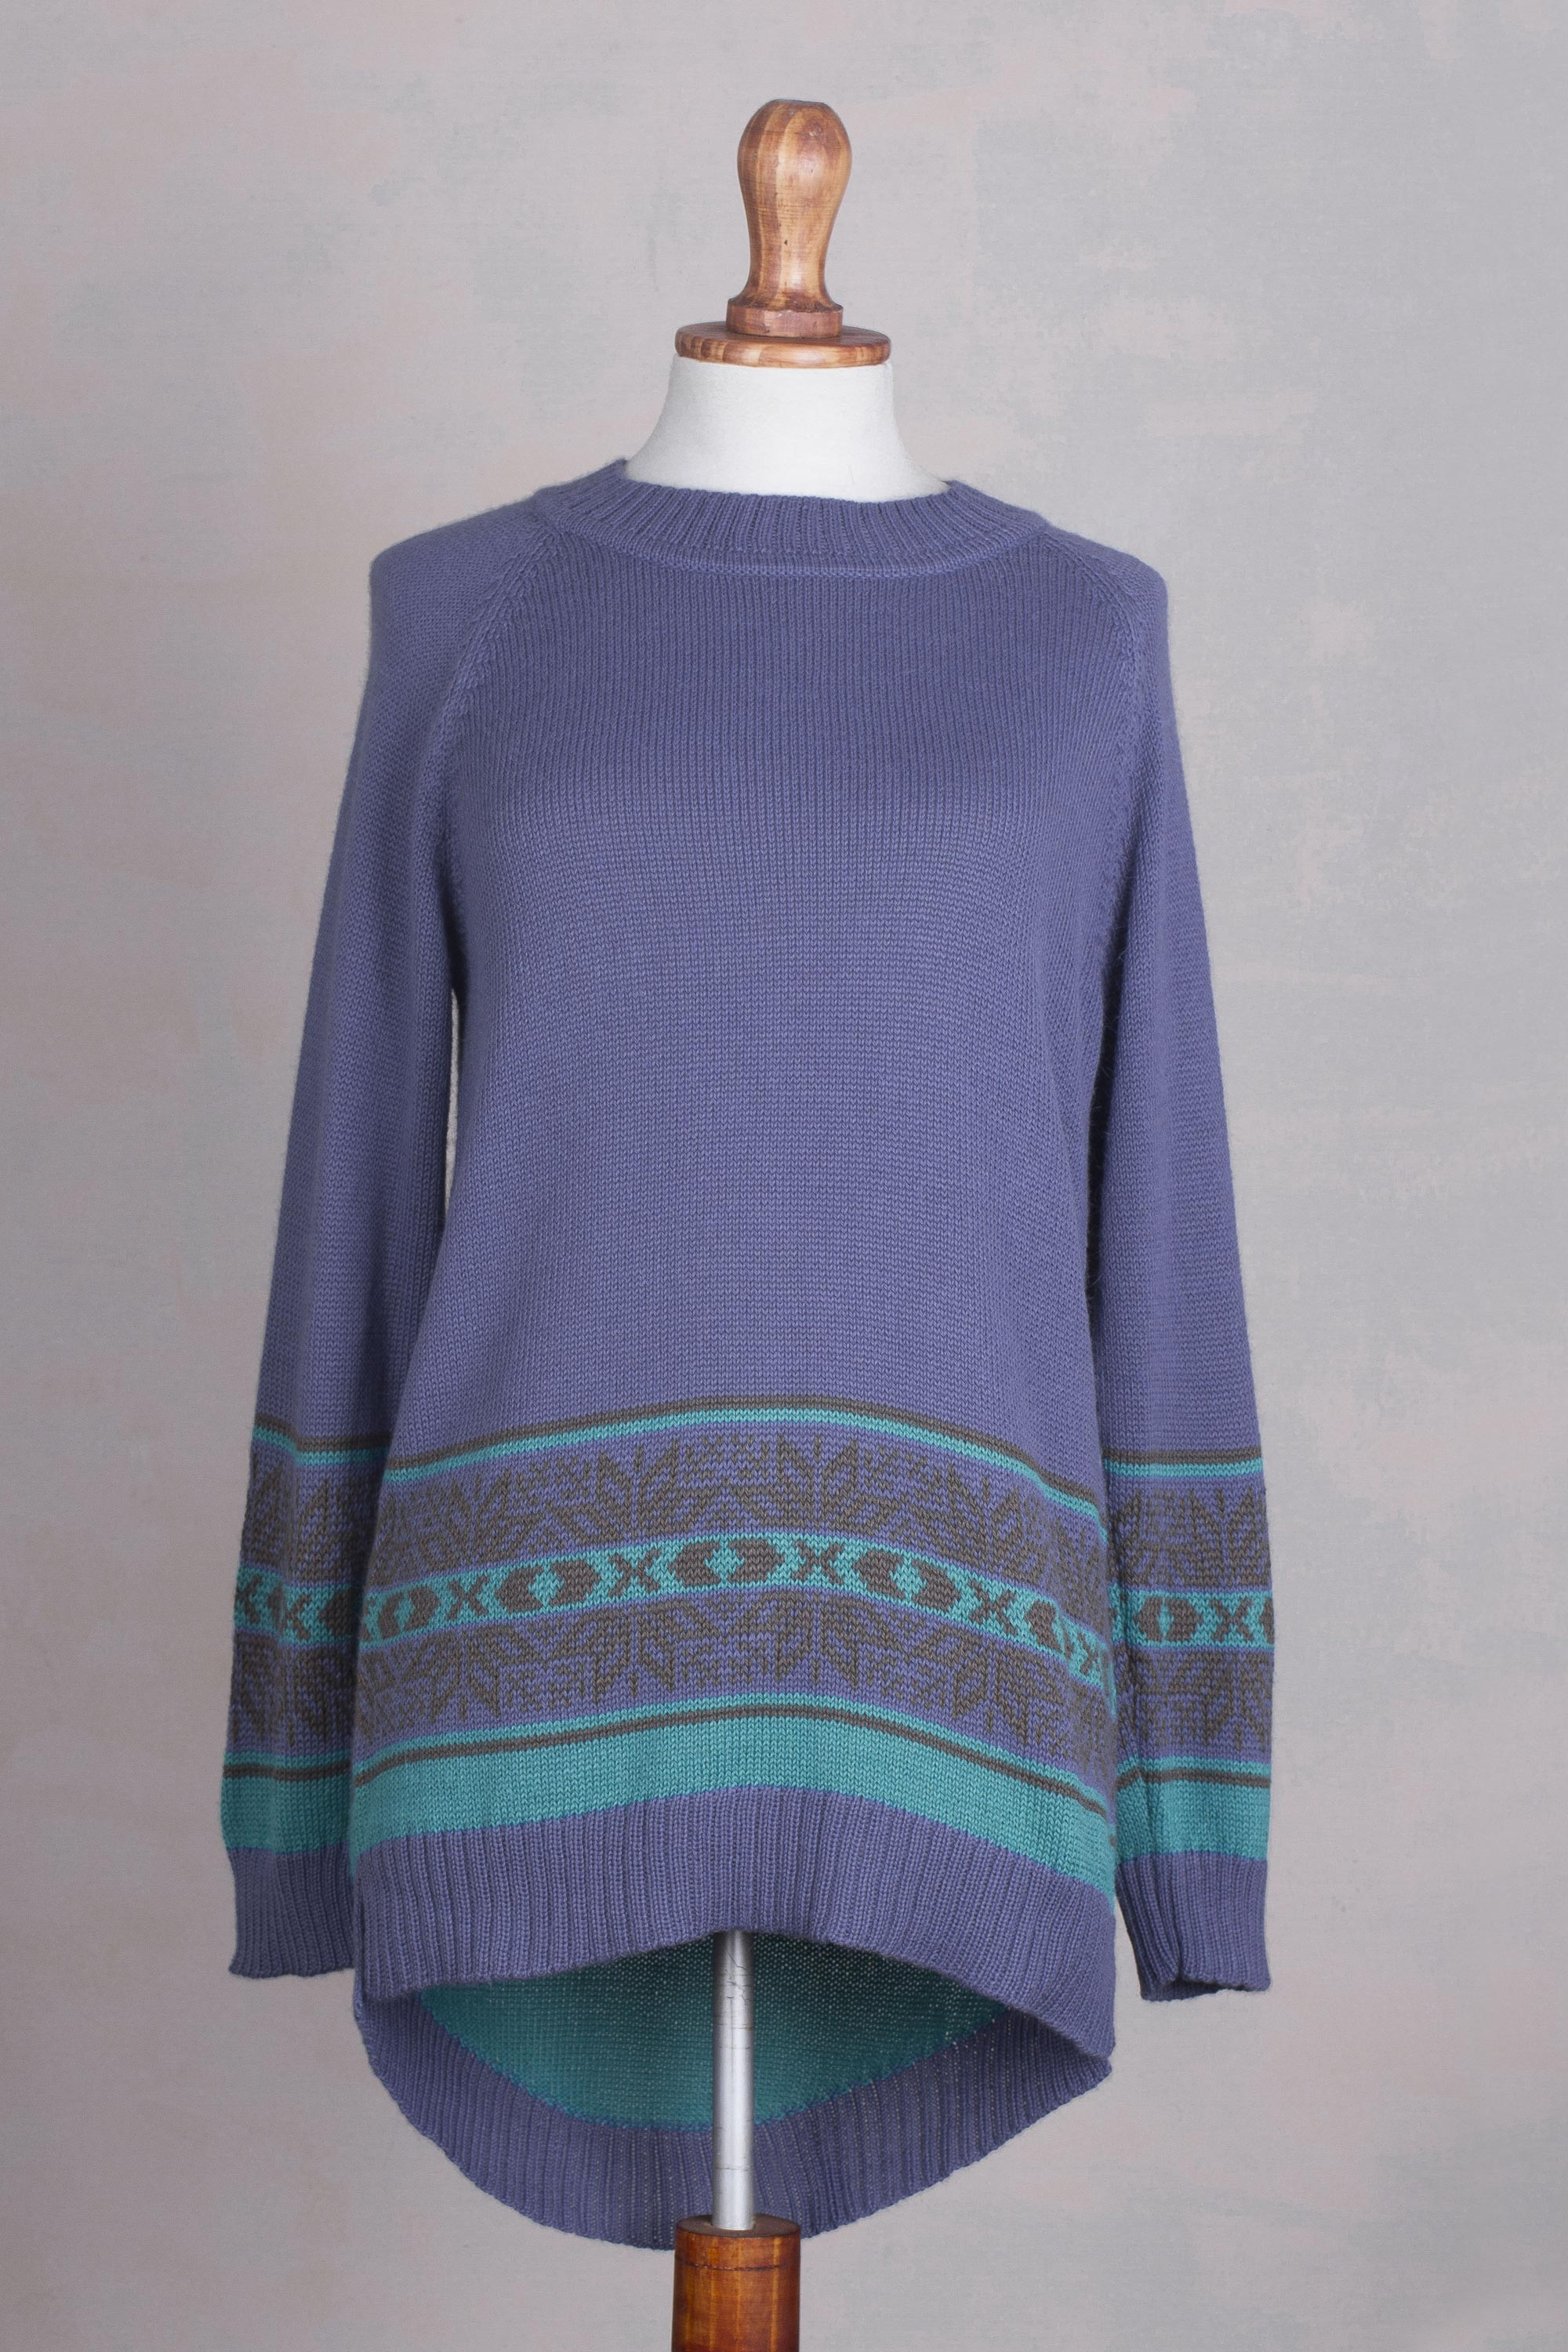 WOMEN'S SWEATERS - Handcrafted women's sweaters at NOVICA